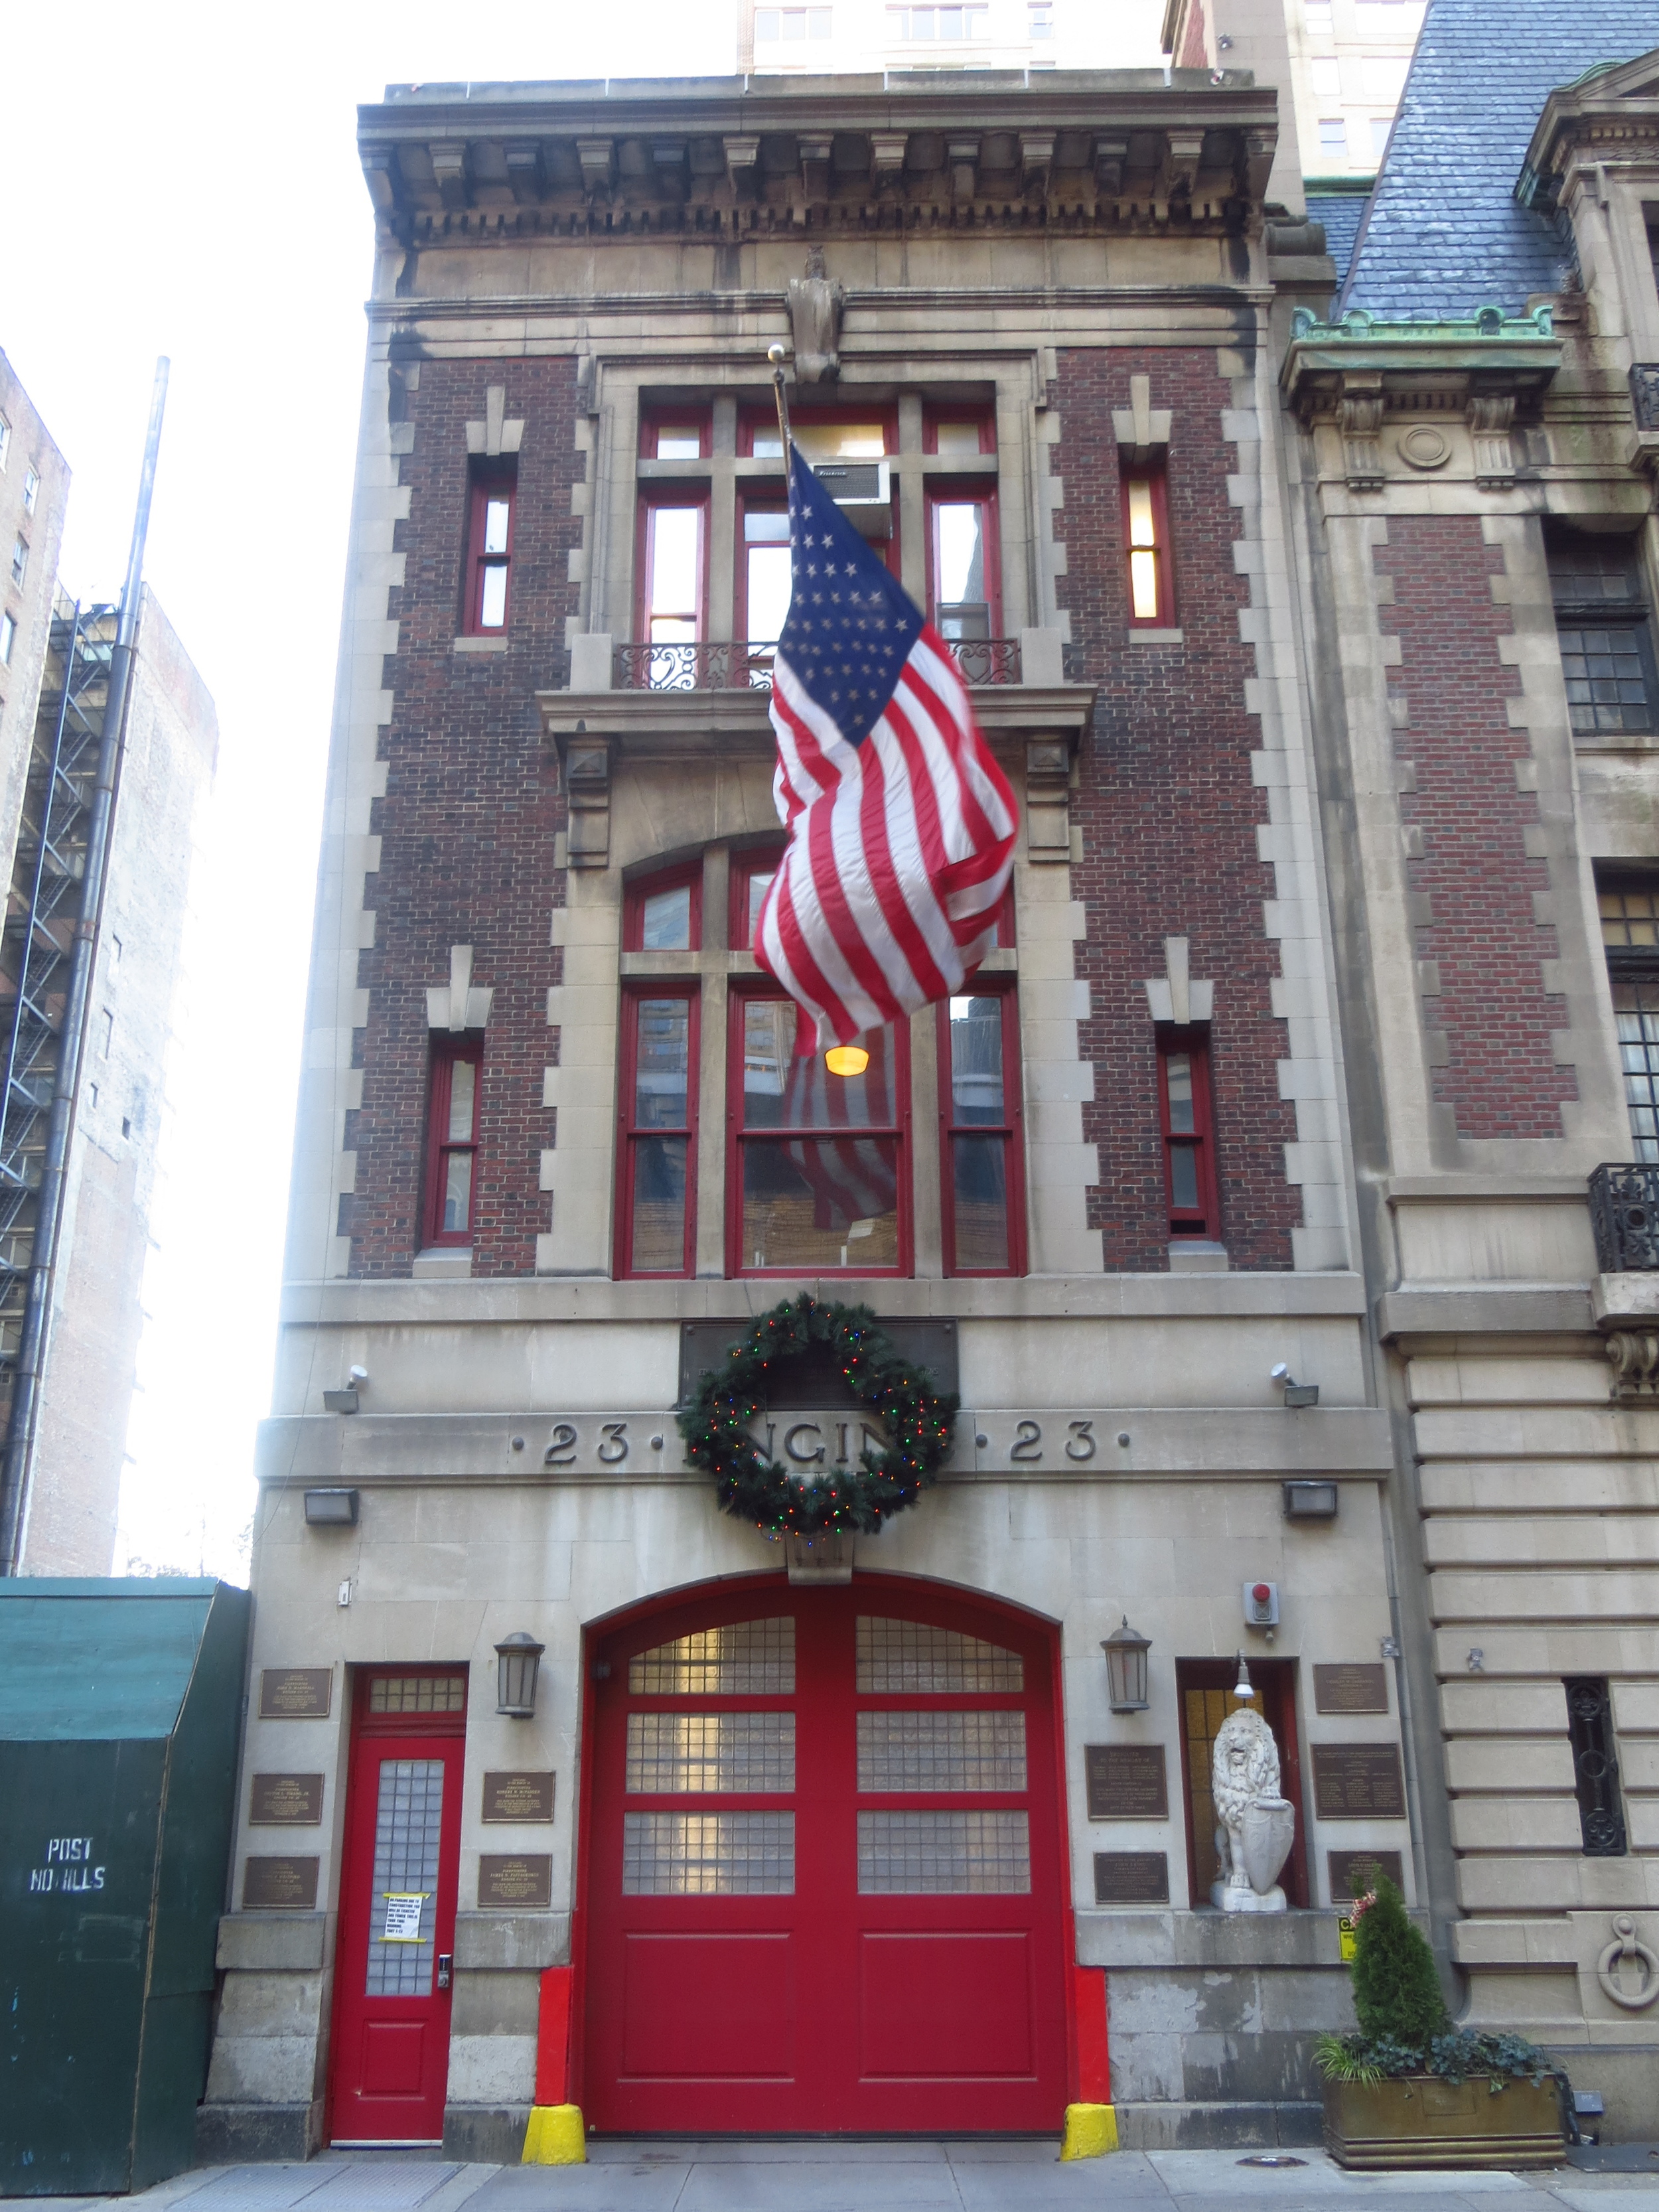 Fire Station (a lot of 9/11 plaques on this one)